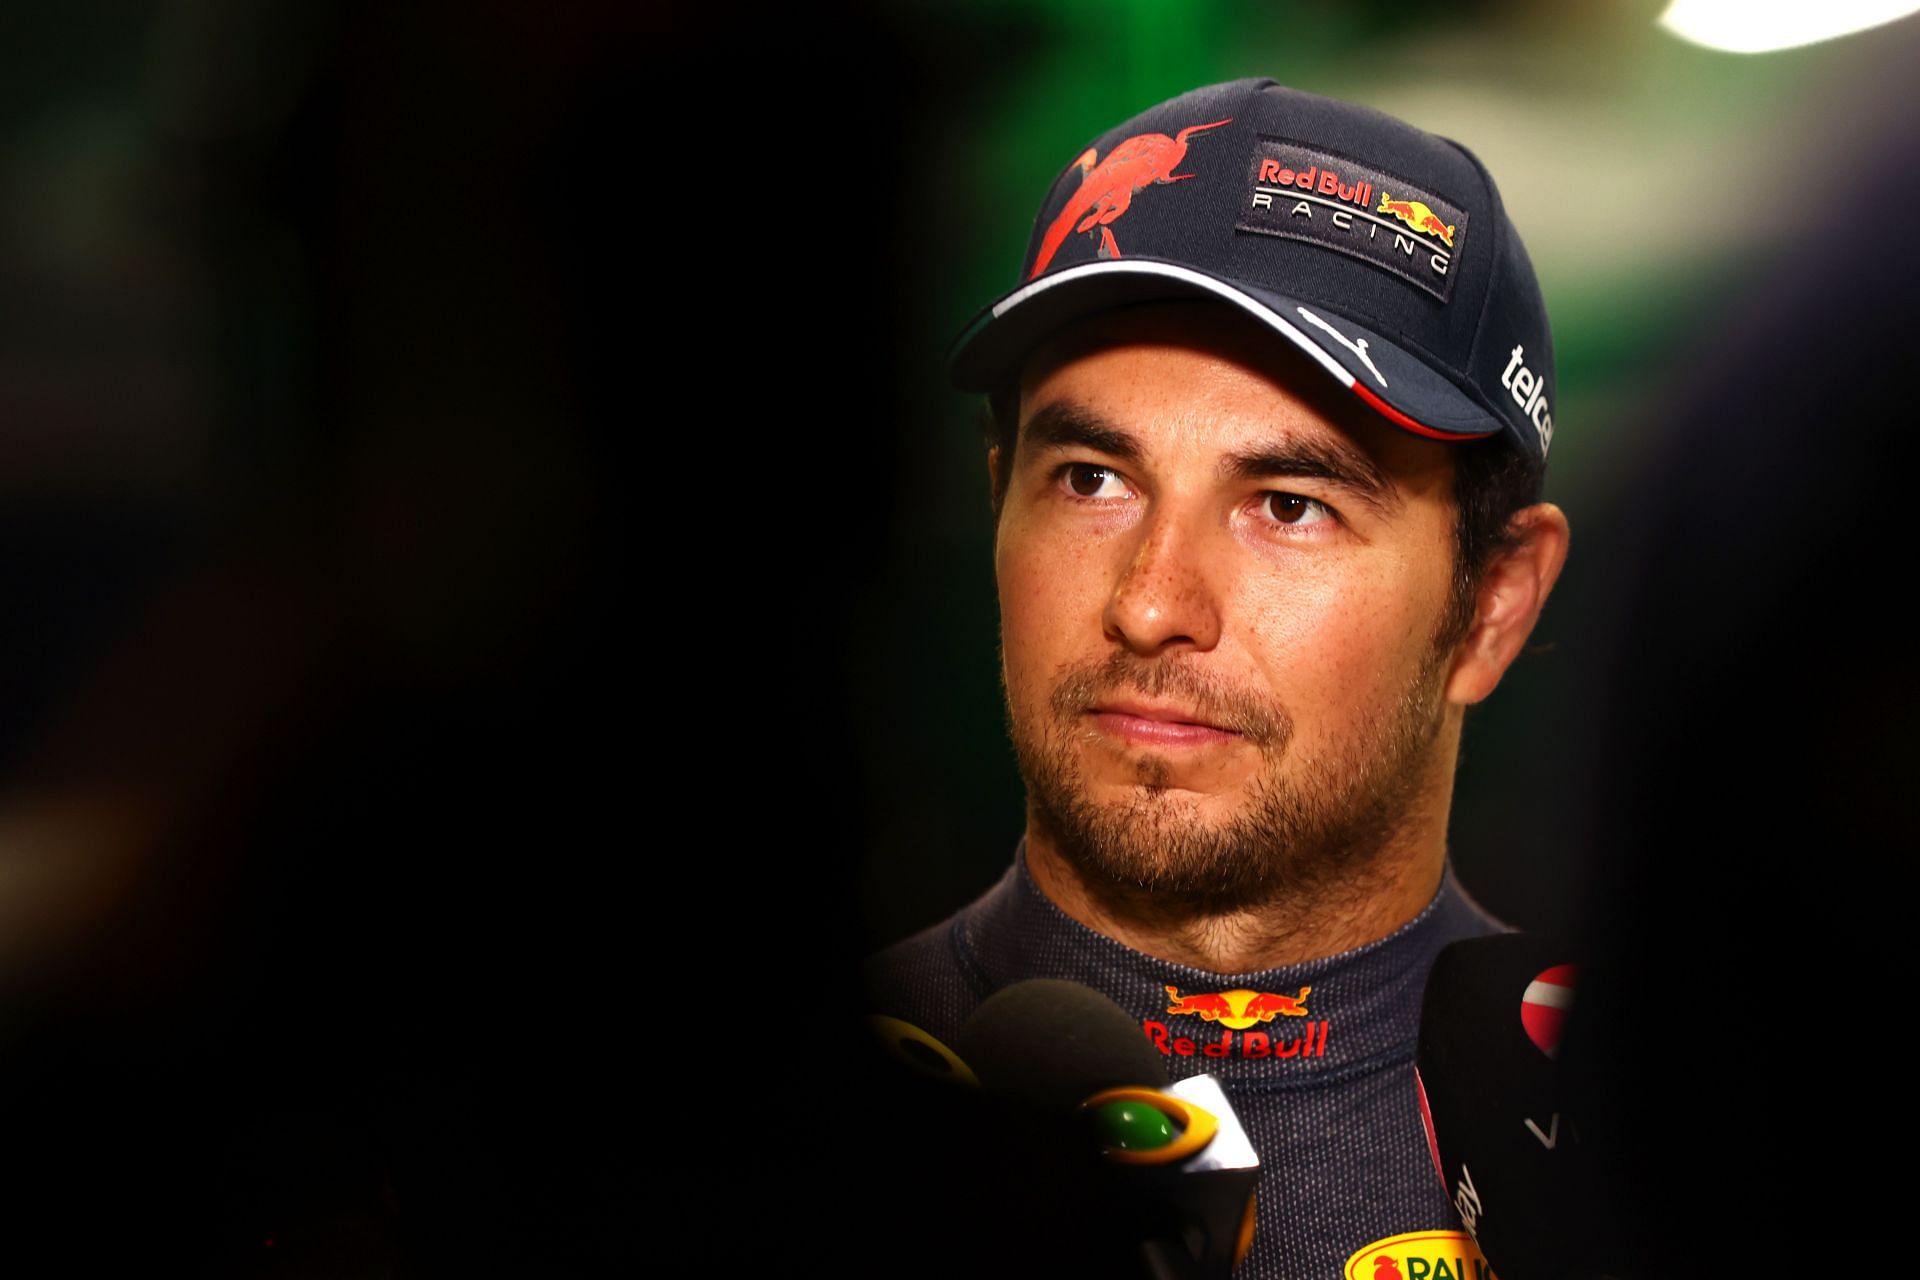 Pole position qualifier Sergio Perez of Mexico and Oracle Red Bull Racing talks to the media in the Paddock after qualifying ahead of the F1 Grand Prix of Saudi Arabia at the Jeddah Corniche Circuit on March 26, 2022 in Jeddah, Saudi Arabia. (Photo by Lars Baron/Getty Images)